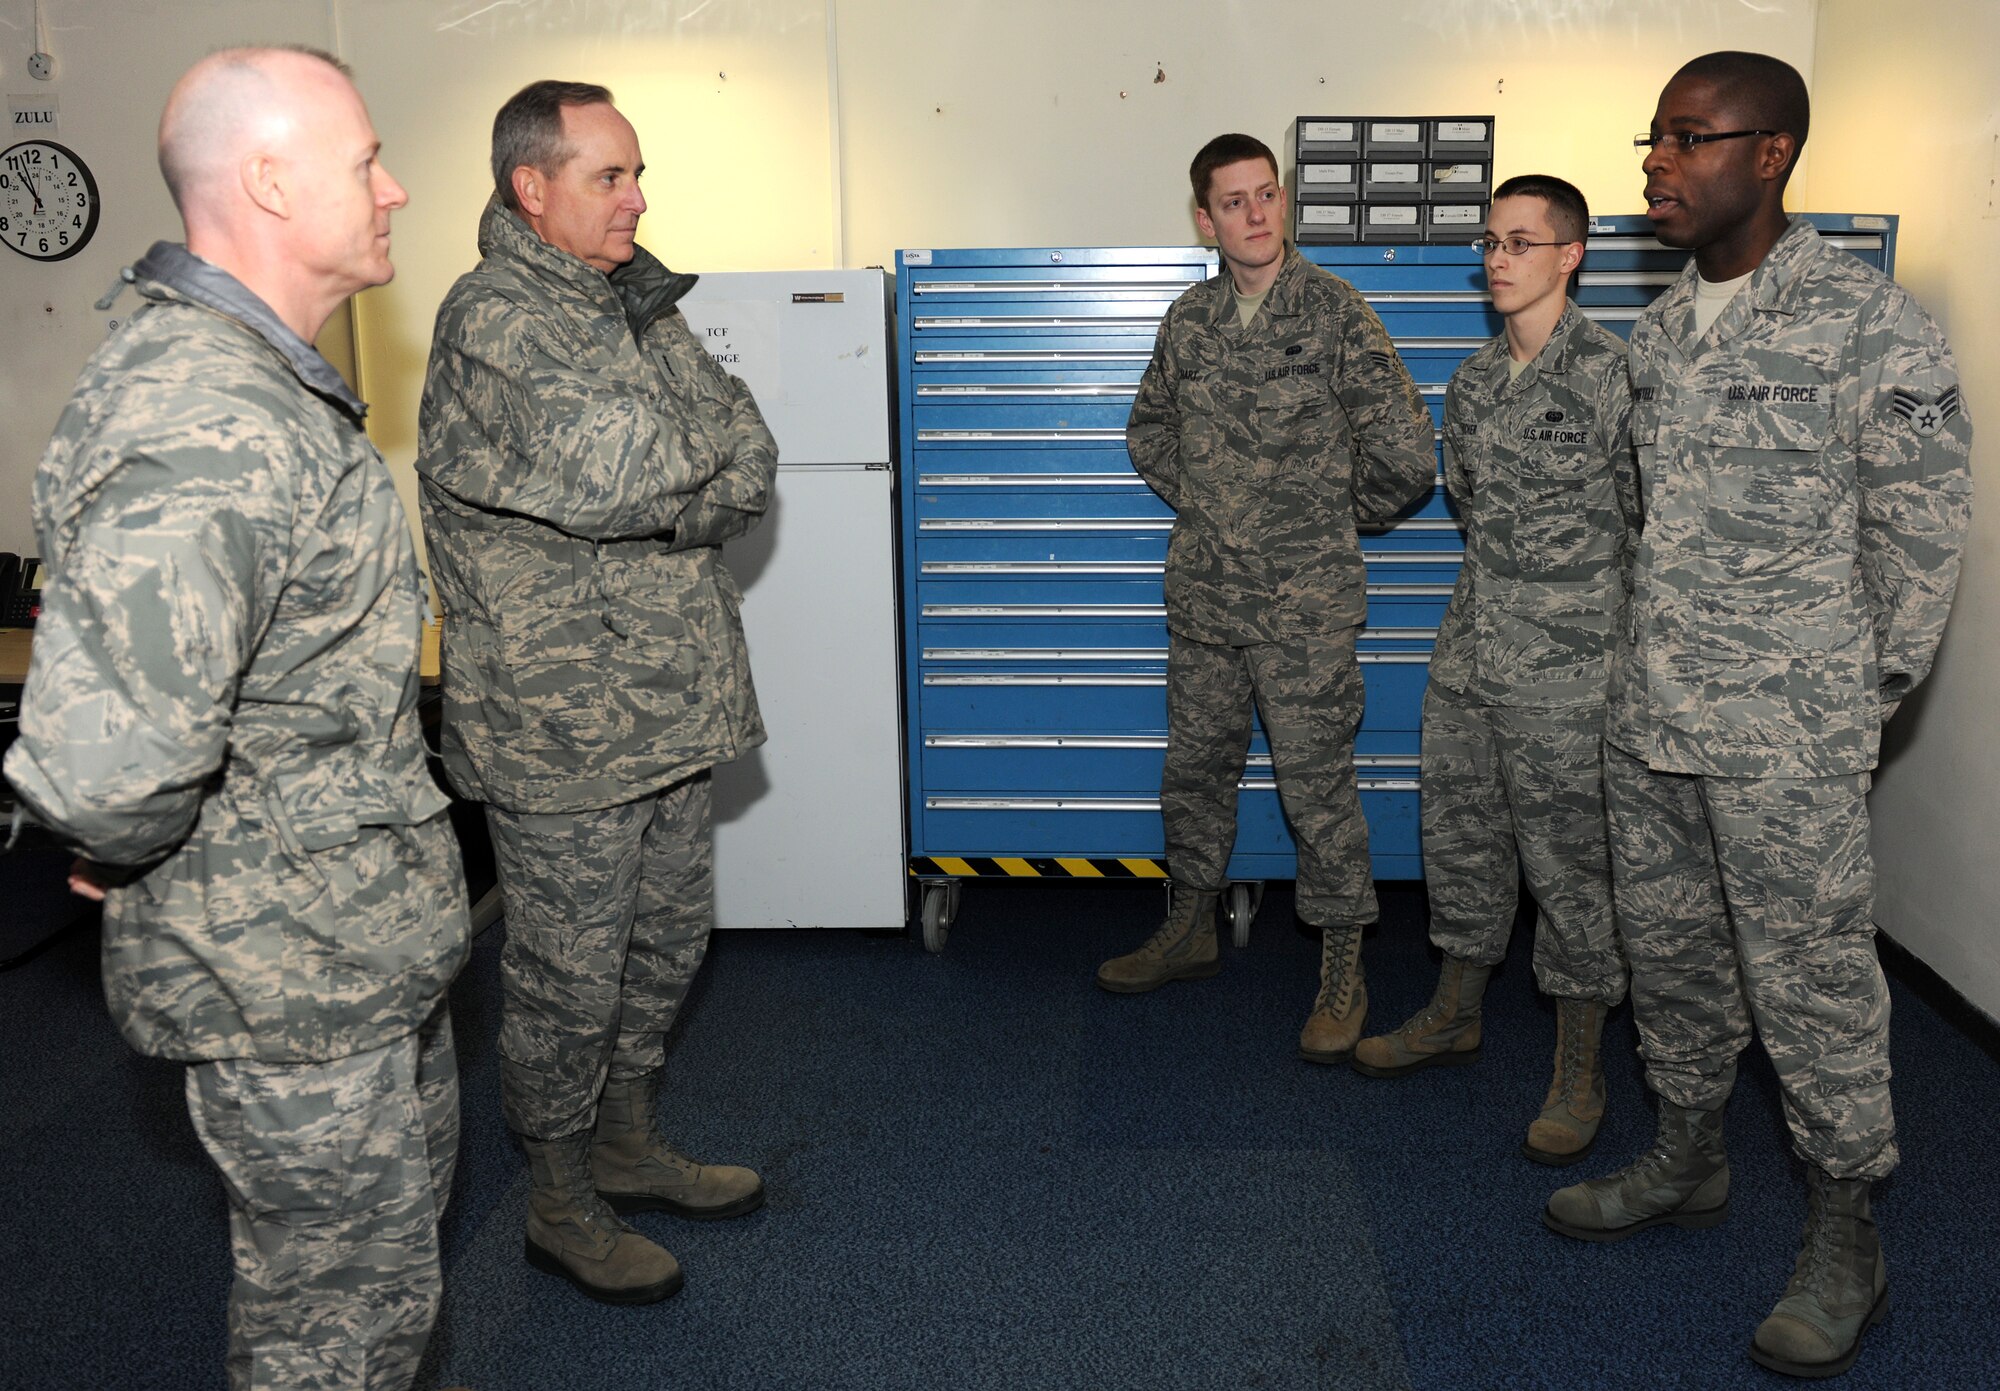 RAF MOLESWORTH, United Kingdom – Senior Airman Daniel Postell (far right), 421st Air Base Squadron, briefs Gen. Mark A. Welsh III, U.S. Air Forces in Europe commander, and USAFE Command Chief David Williamson about postal operations at RAF  Menwith Hill Jan. 20. Postell, along with Senior Airman Colin Hart, 423rd Communications Squadron, and Airman First Class Charles Fletcher, 422nd CS, briefed  Welsh and Williamson about postal and communications operations within the 501st Combat Support Wing. (U.S. Air Force photo by Senior Airman Joel Mease)